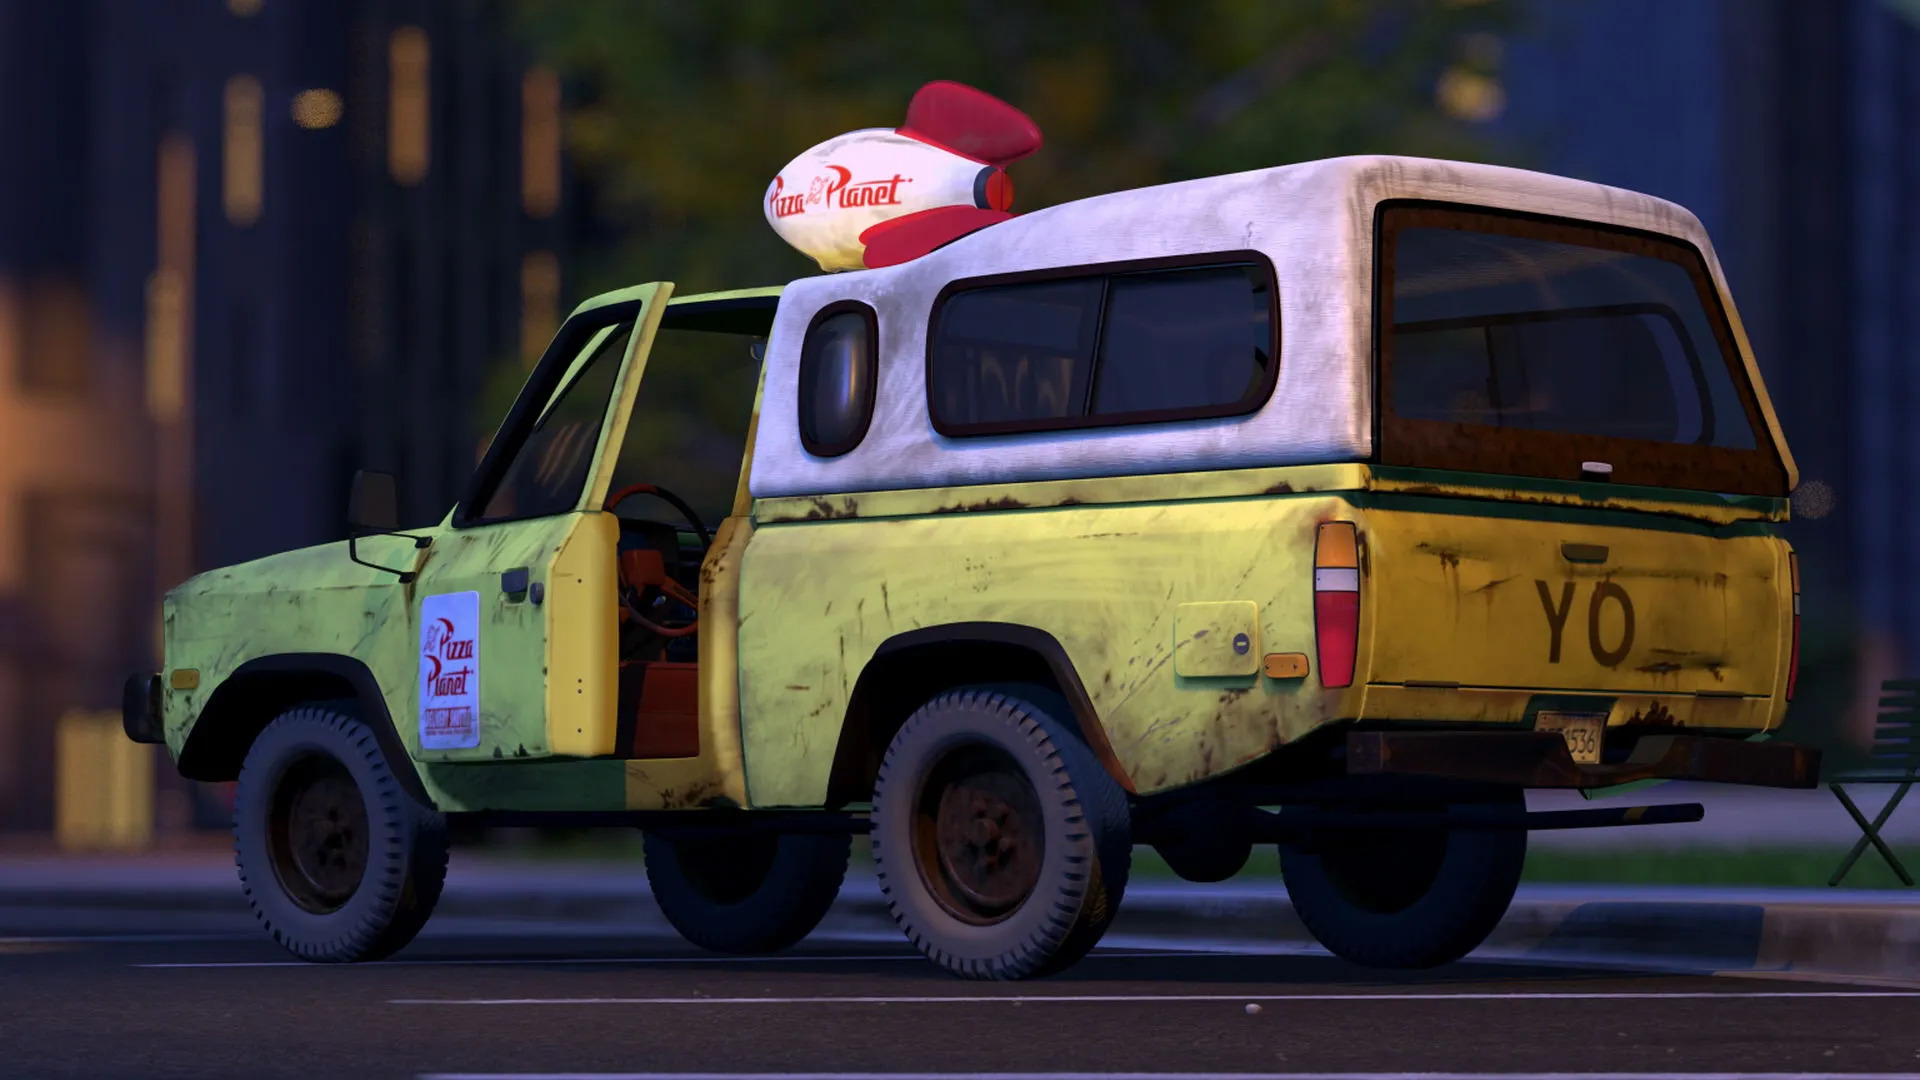 pixar characters in other movies. The above Pixar truck appeared